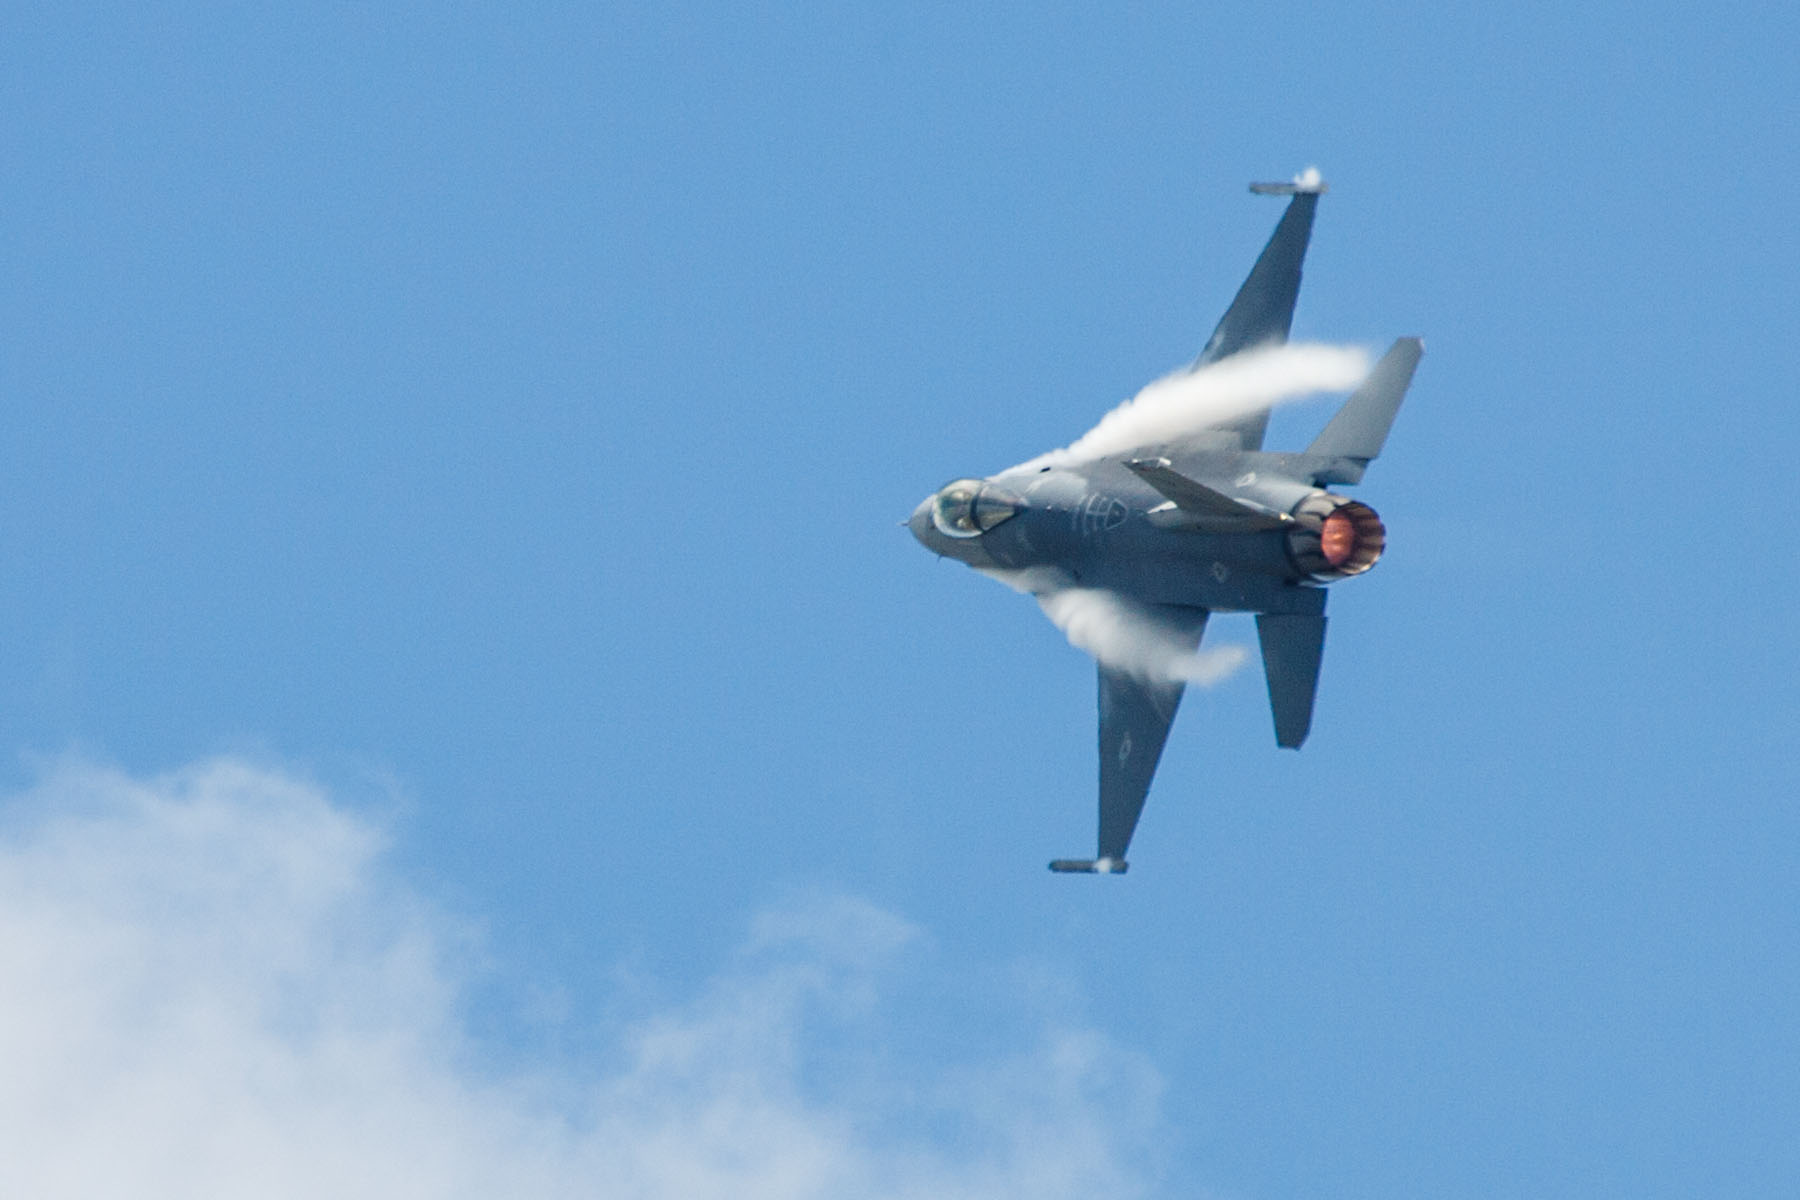 F-16 Falcon smashing moisture out of the air, TICO Warbirds Air Show, Titusville, Florida.  Click for next photo.